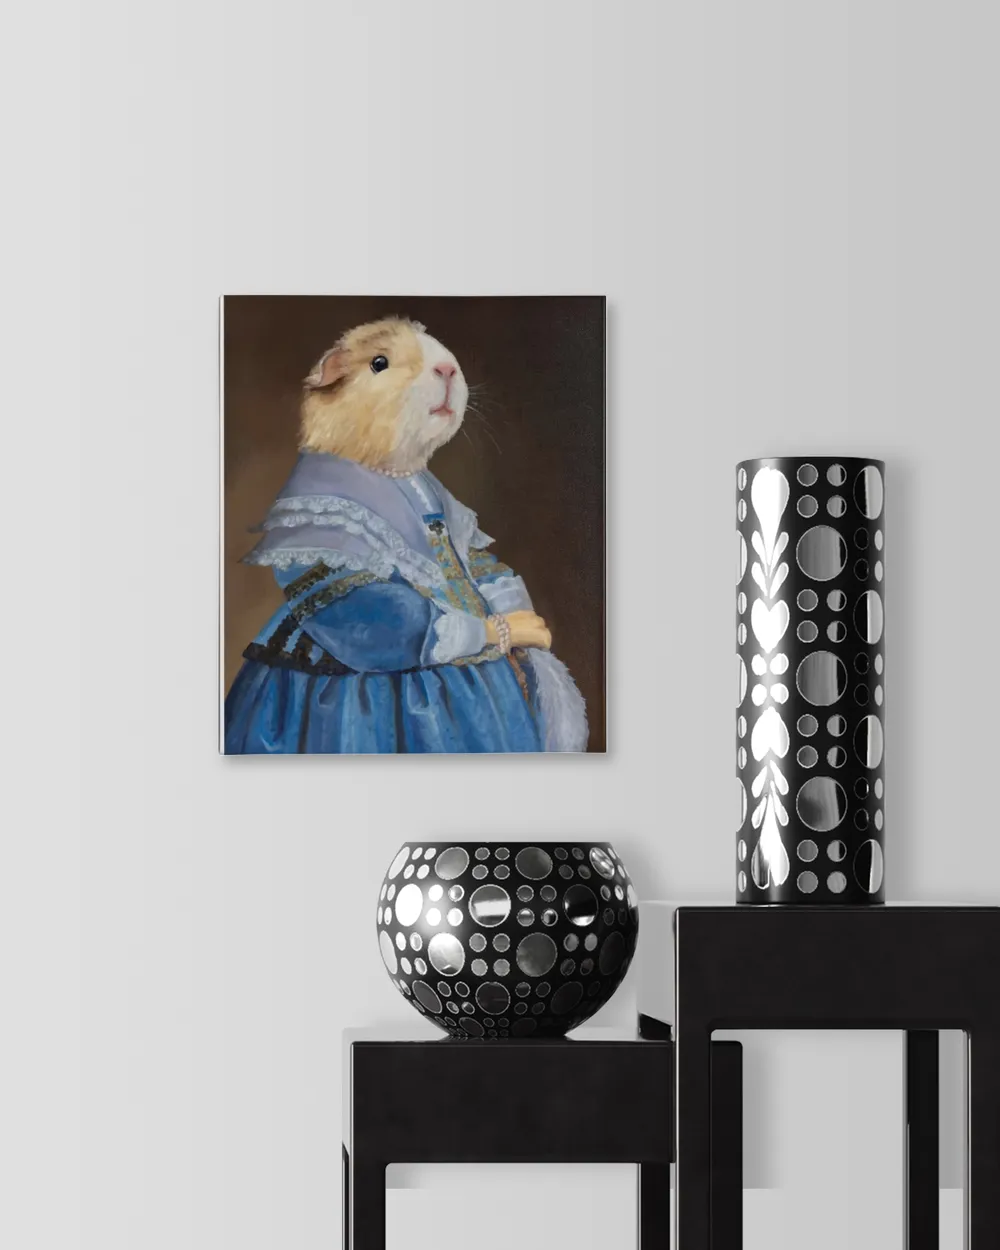 Guinea Pig Portrait on Stretch Fabric Wall Art Decor, ready to hang!